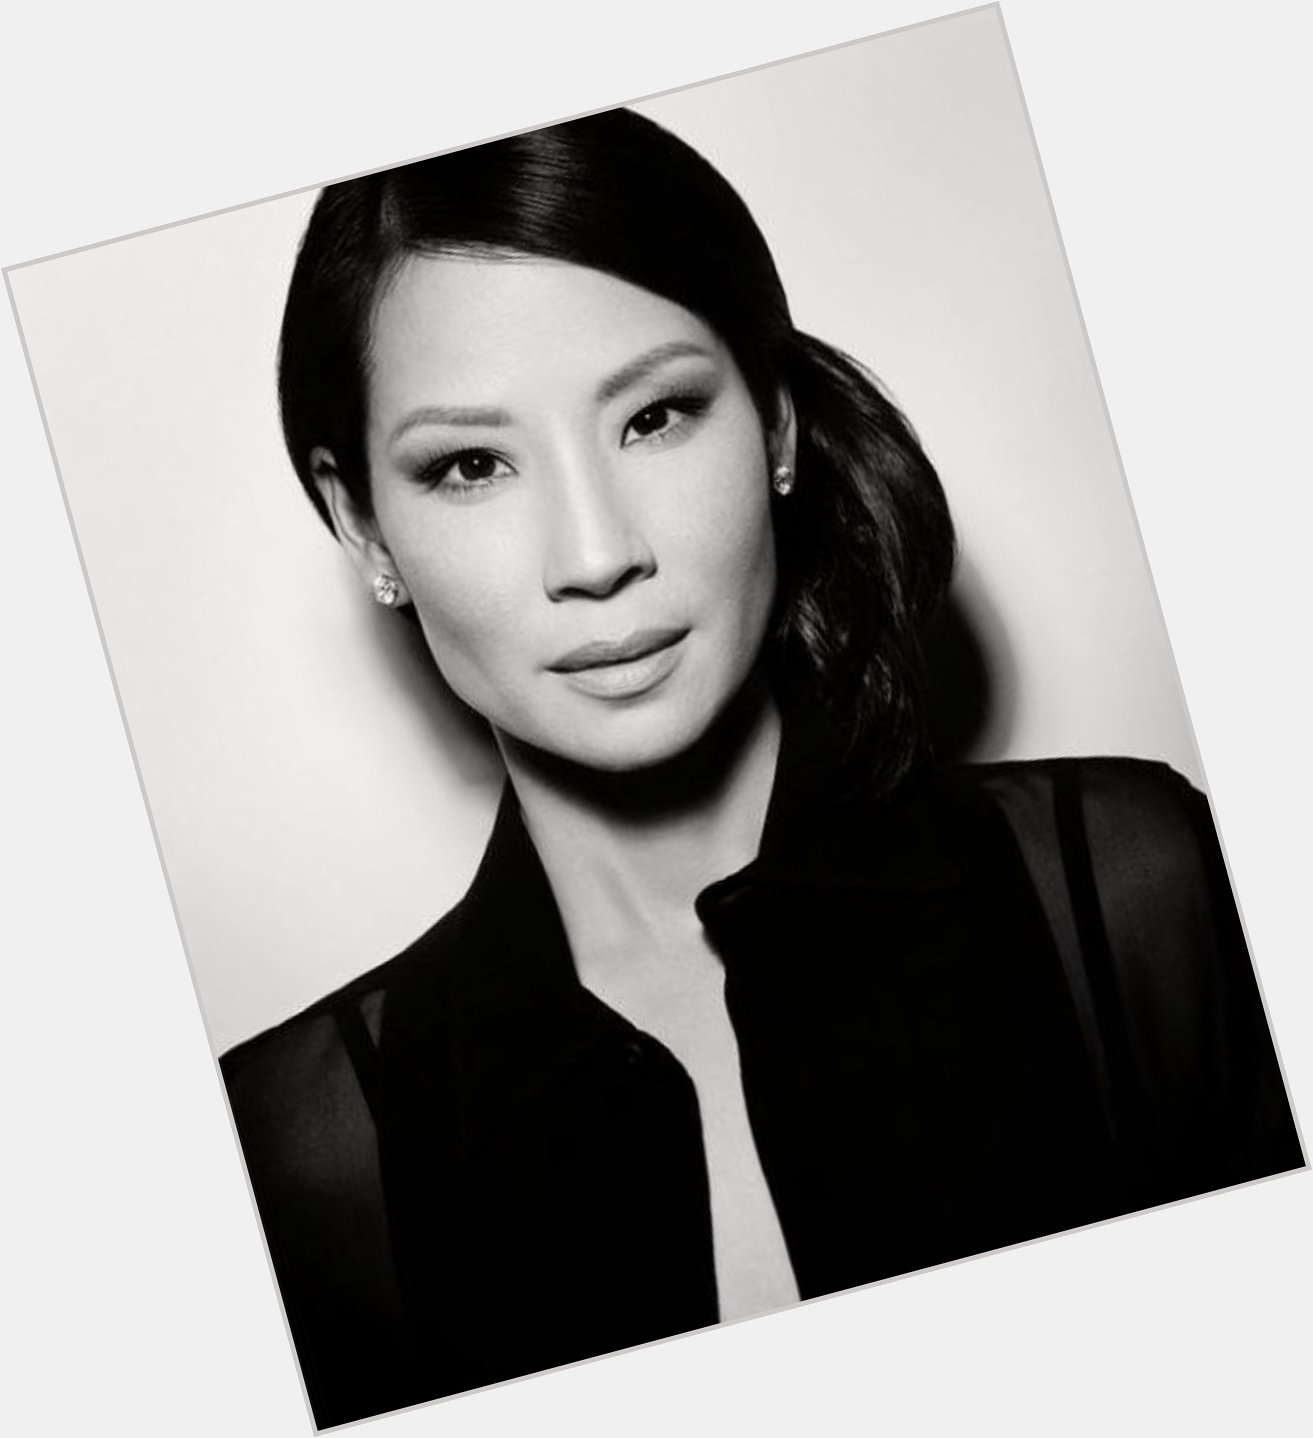 Happy 49th birthday to my favorite icon/actress Lucy Liu may I age gracefully as her 